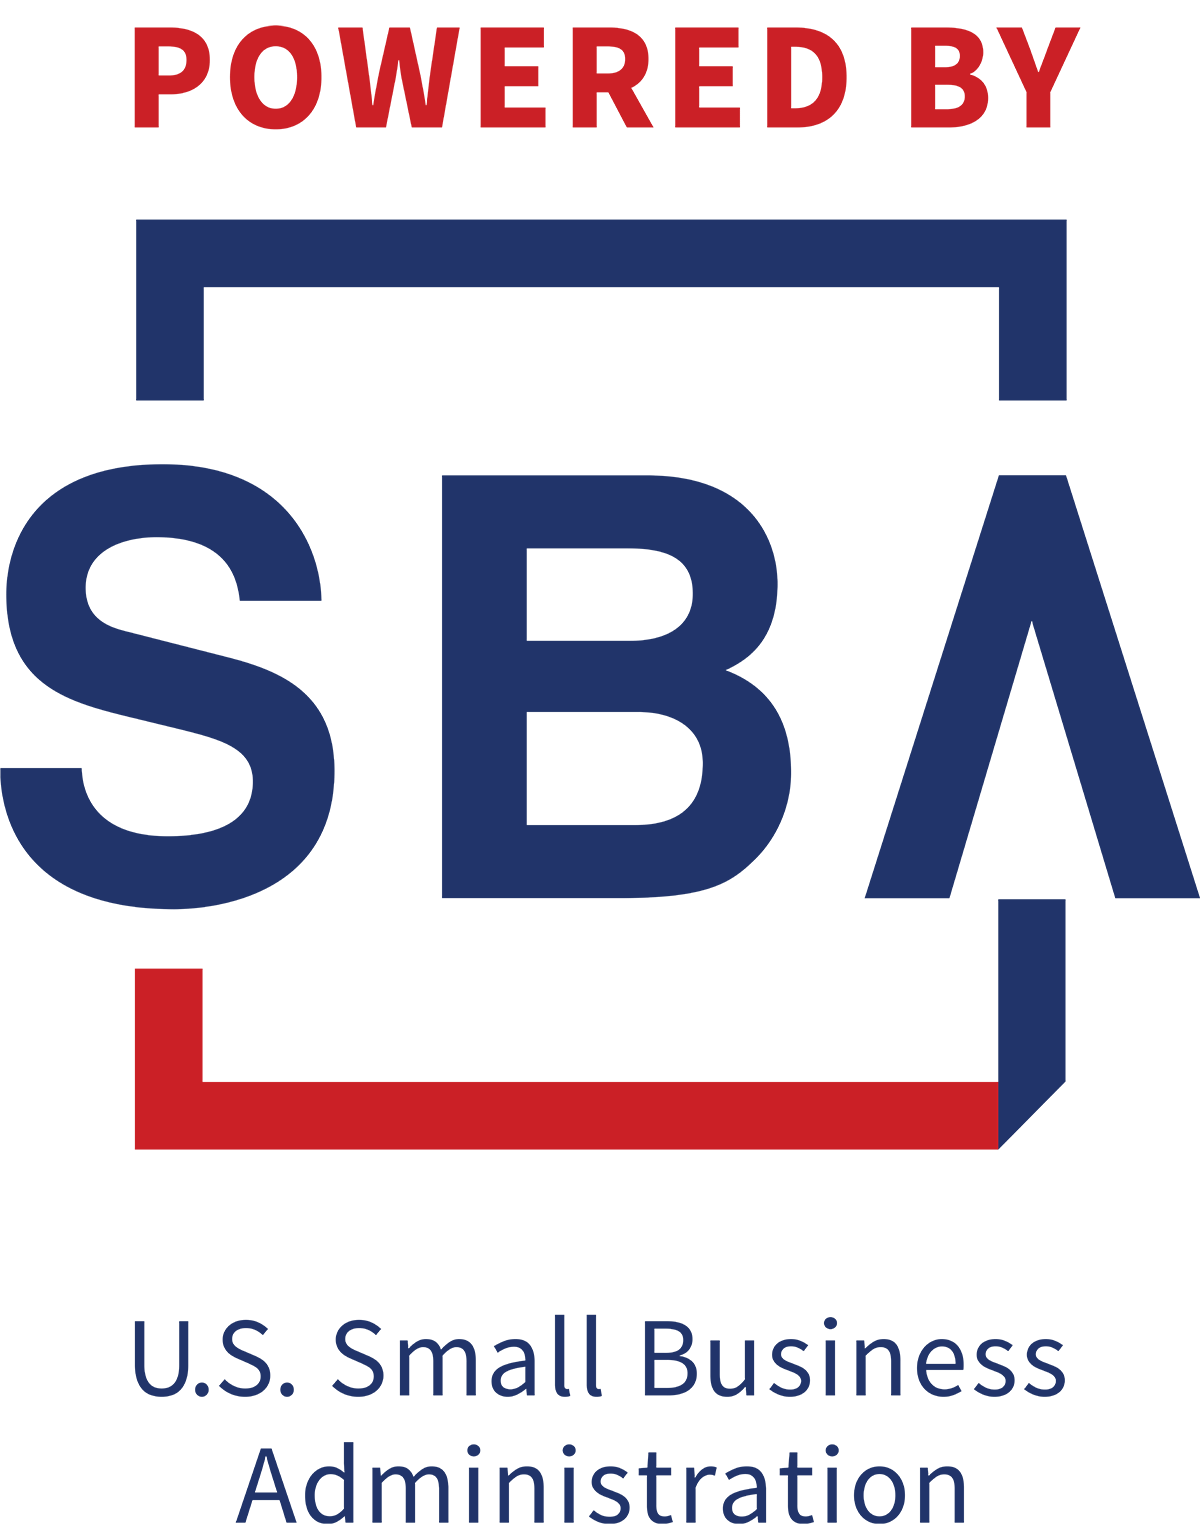 Powered by U.S. Small Business Administration